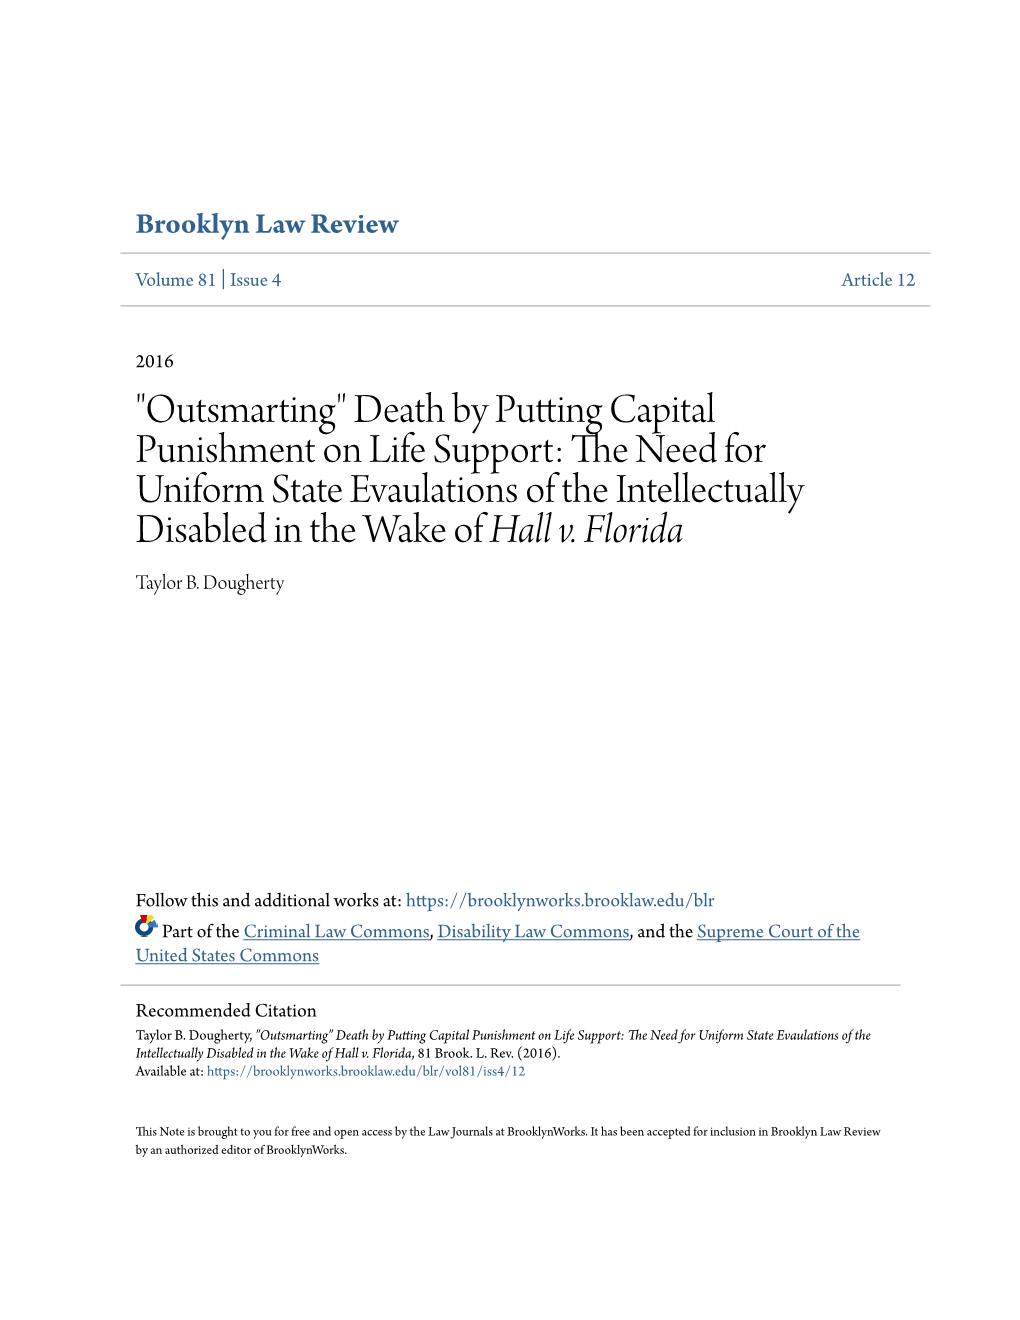 Death by Putting Capital Punishment on Life Support: the Eedn for Uniform State Evaulations of the Intellectually Disabled in the Wake of Hall V